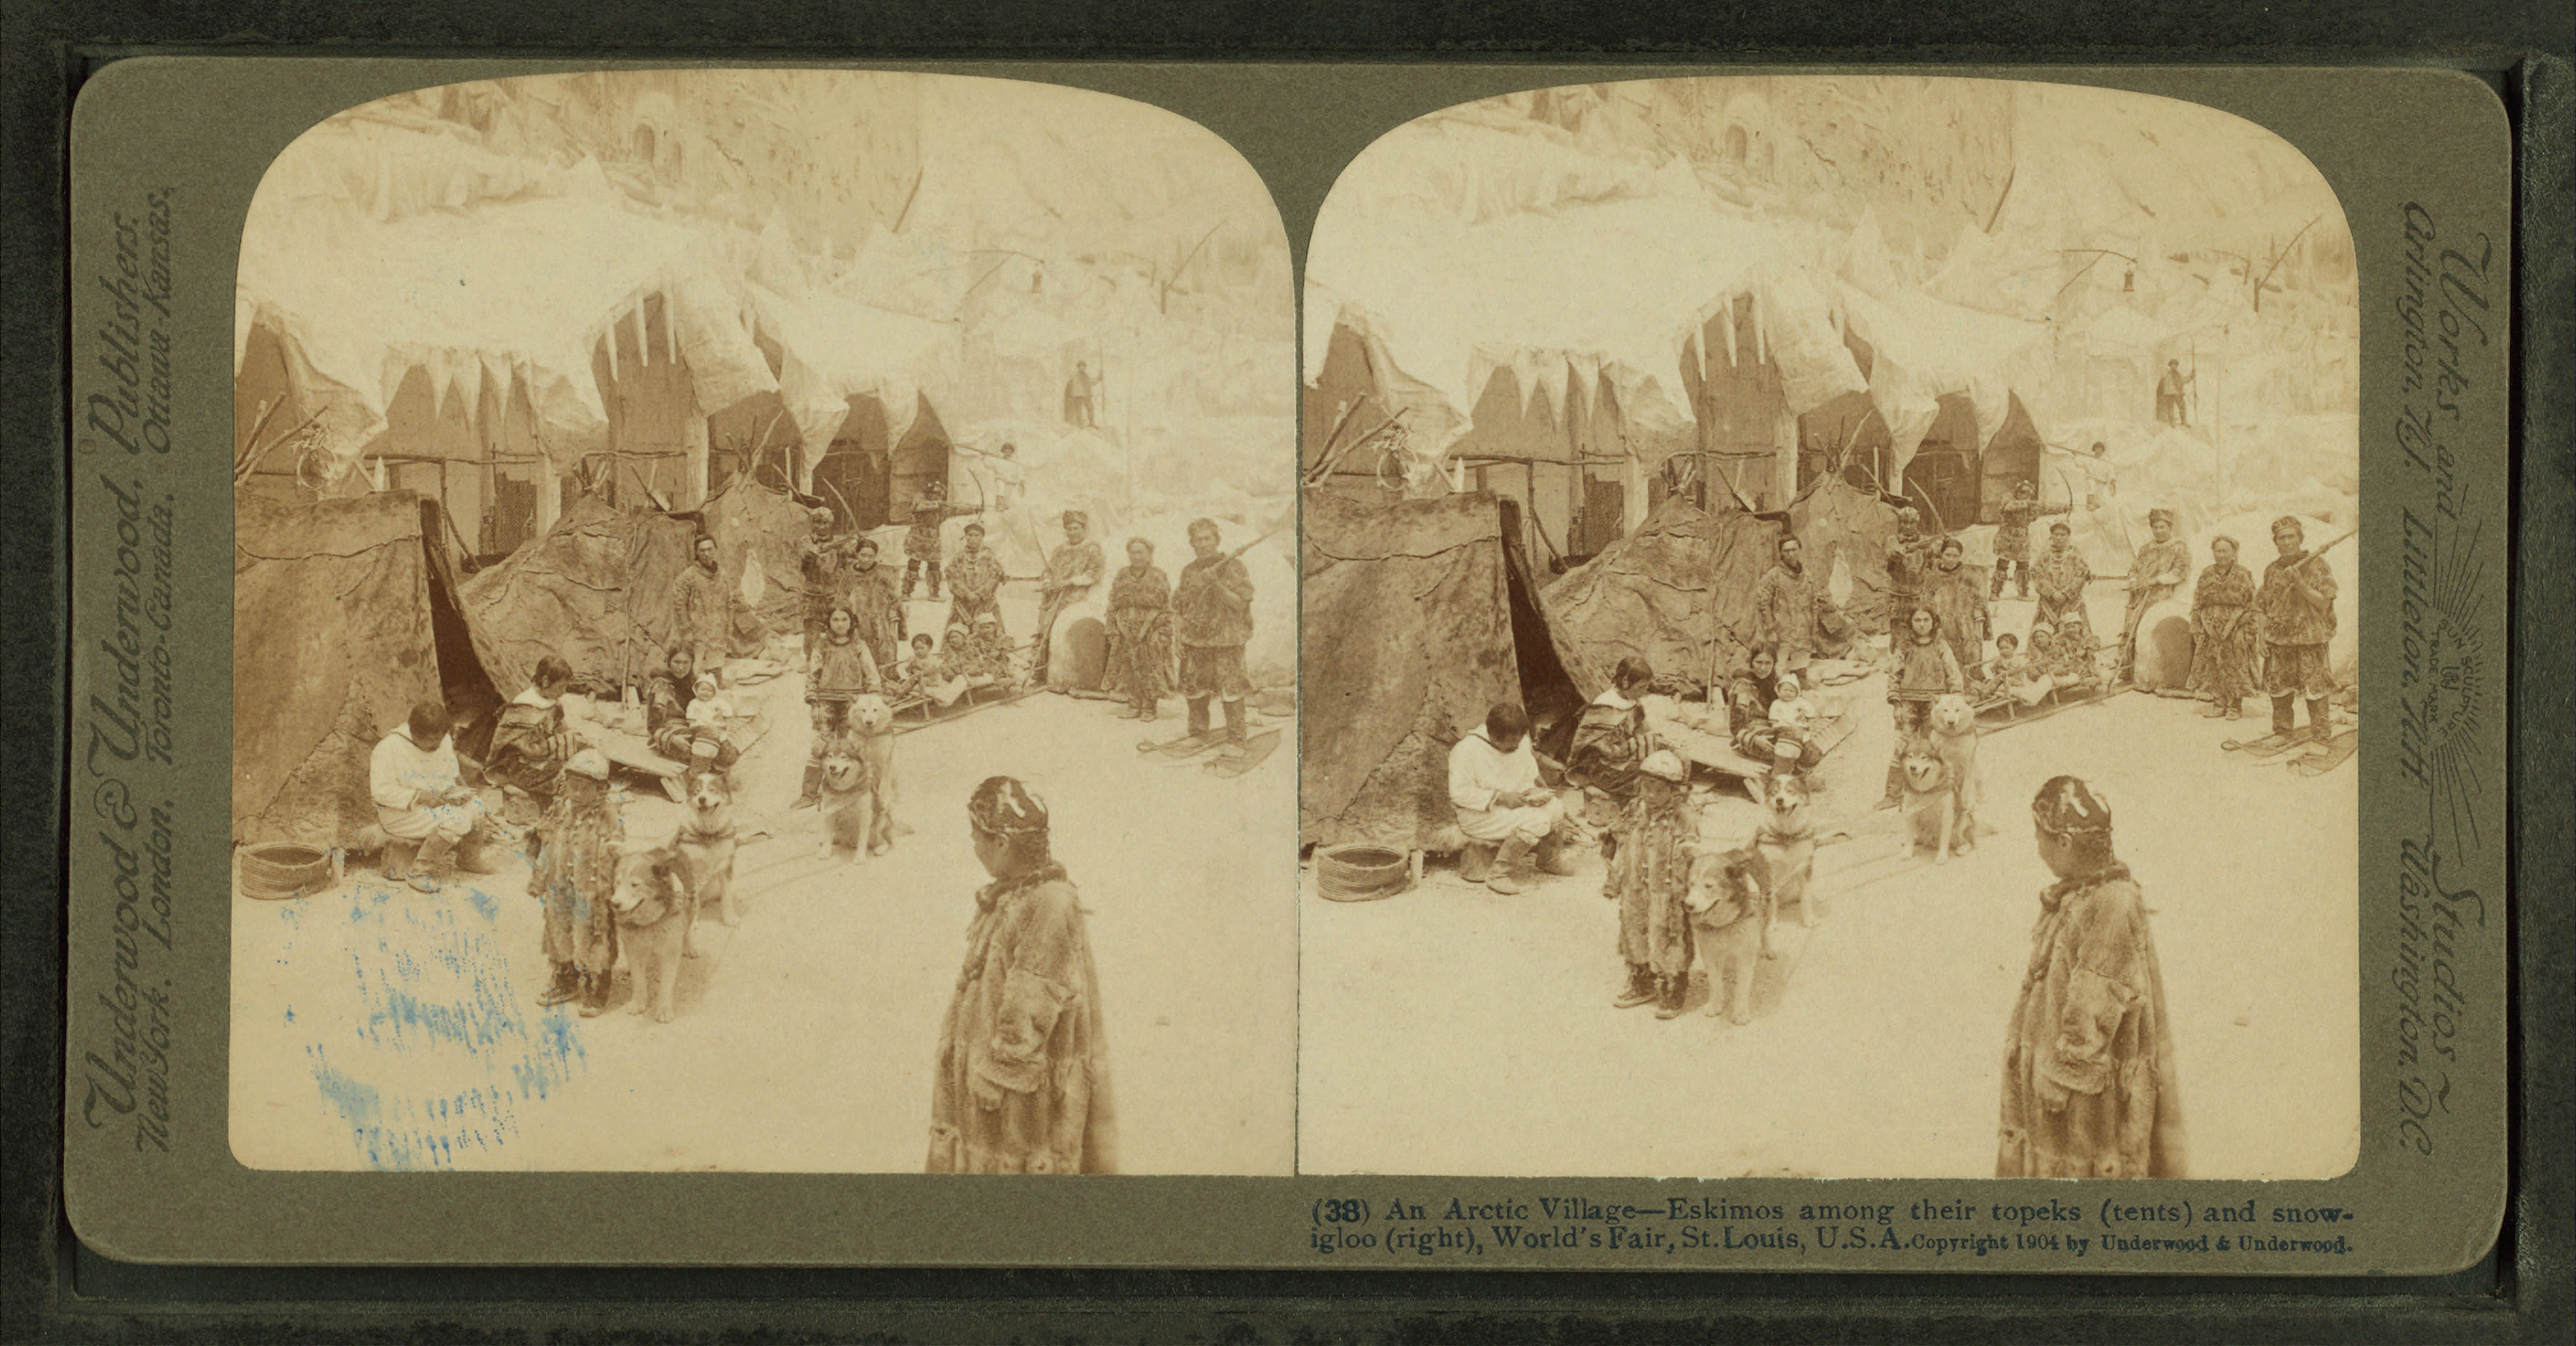 An Arctic Village-Eskimos among, their topeks (tents) and snow, igloo (right), St. Louis, from Robert N. Dennis collection of stereoscopic views 2